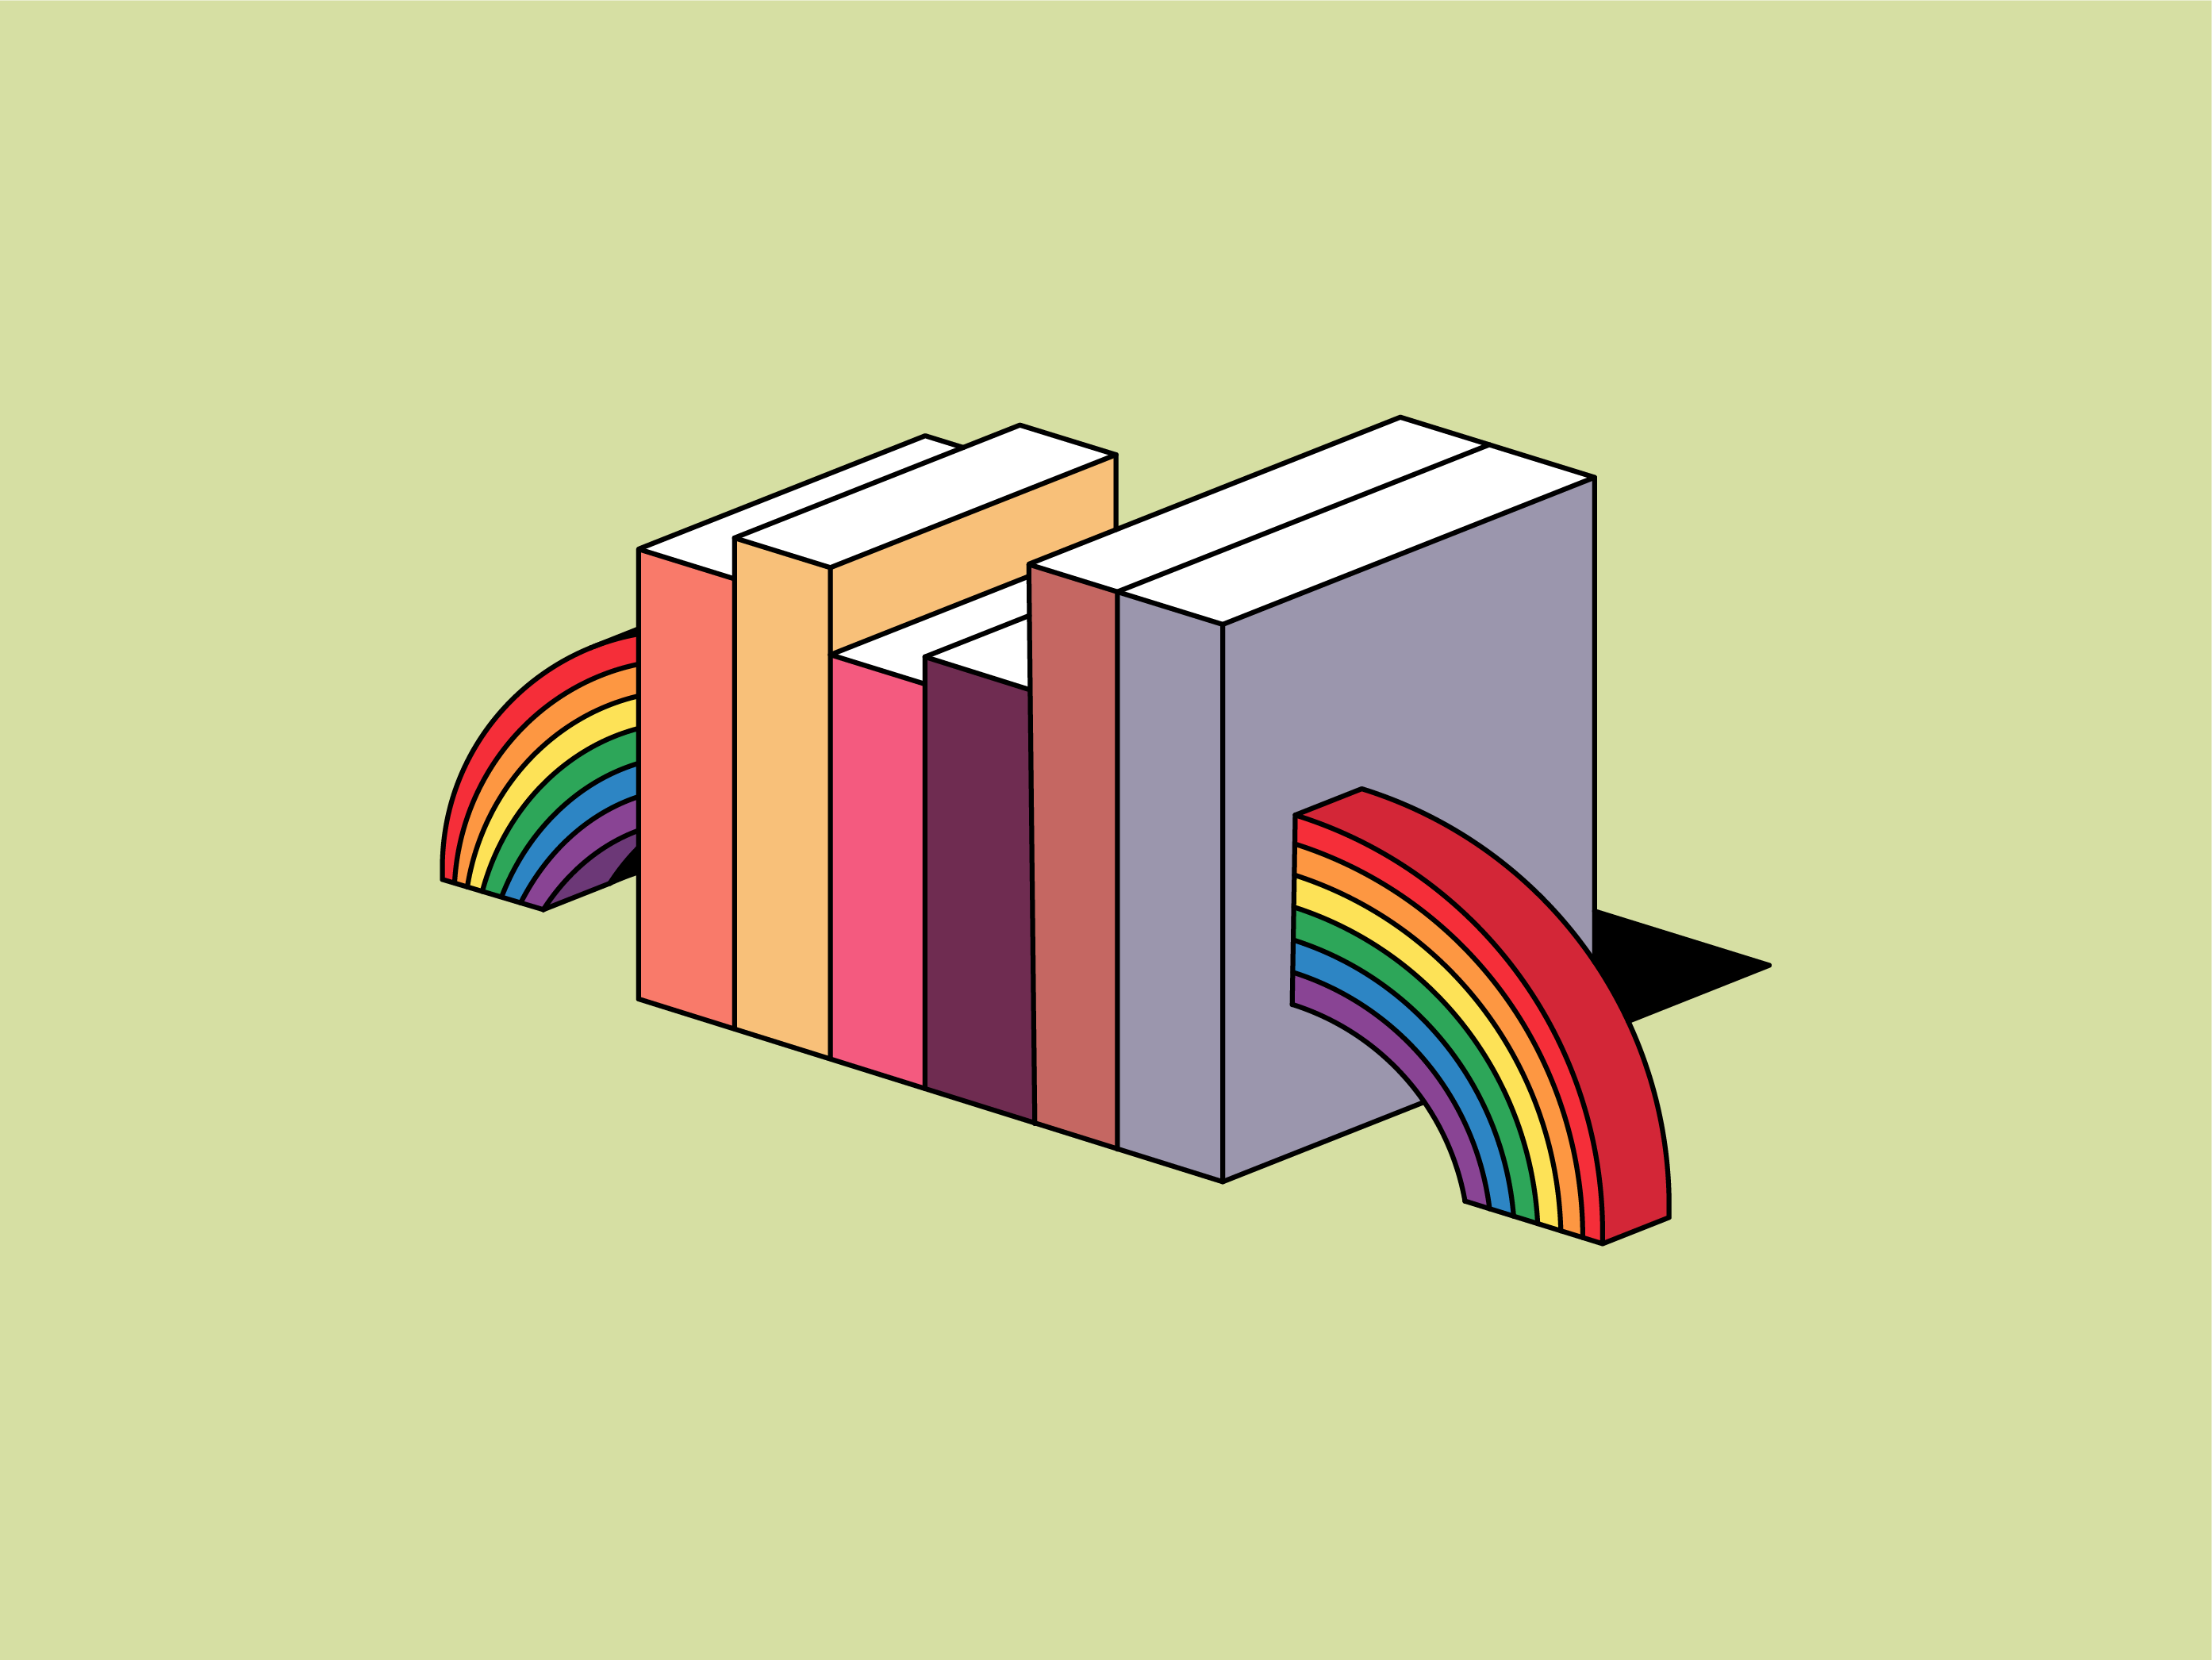 Thinx - Periodical - Our Pride Book Club Reading List